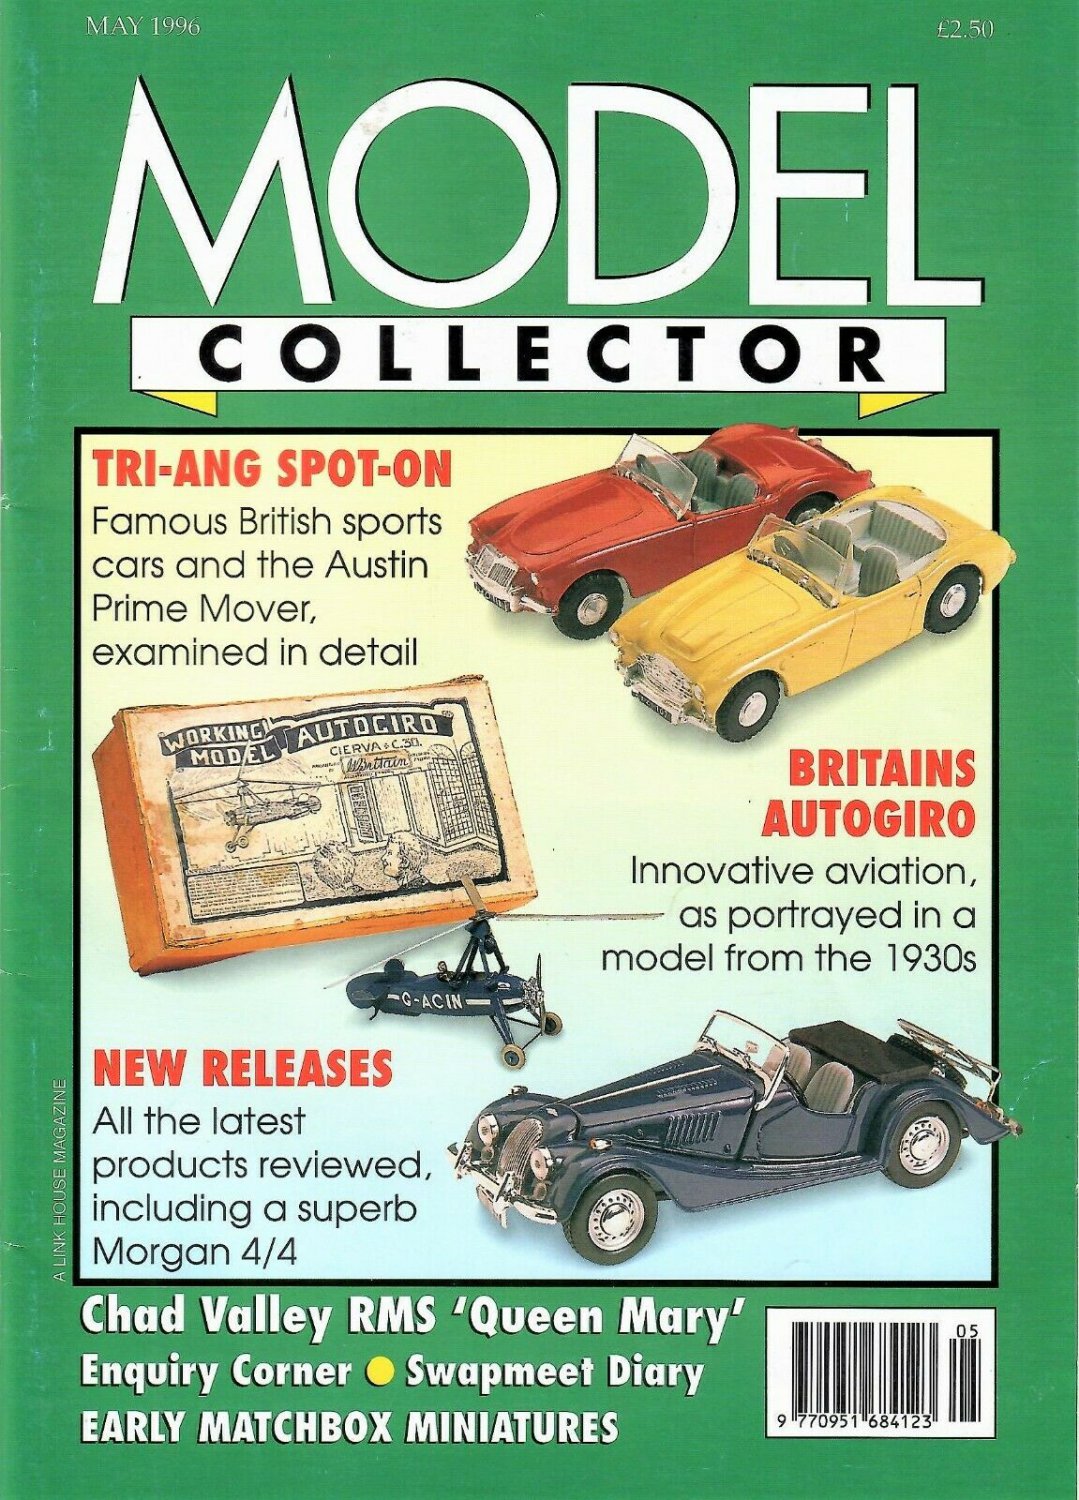 MODEL COLLECTOR MAGAZINE May 1996 NOREV Triang-Spot-On TIBOR REICH